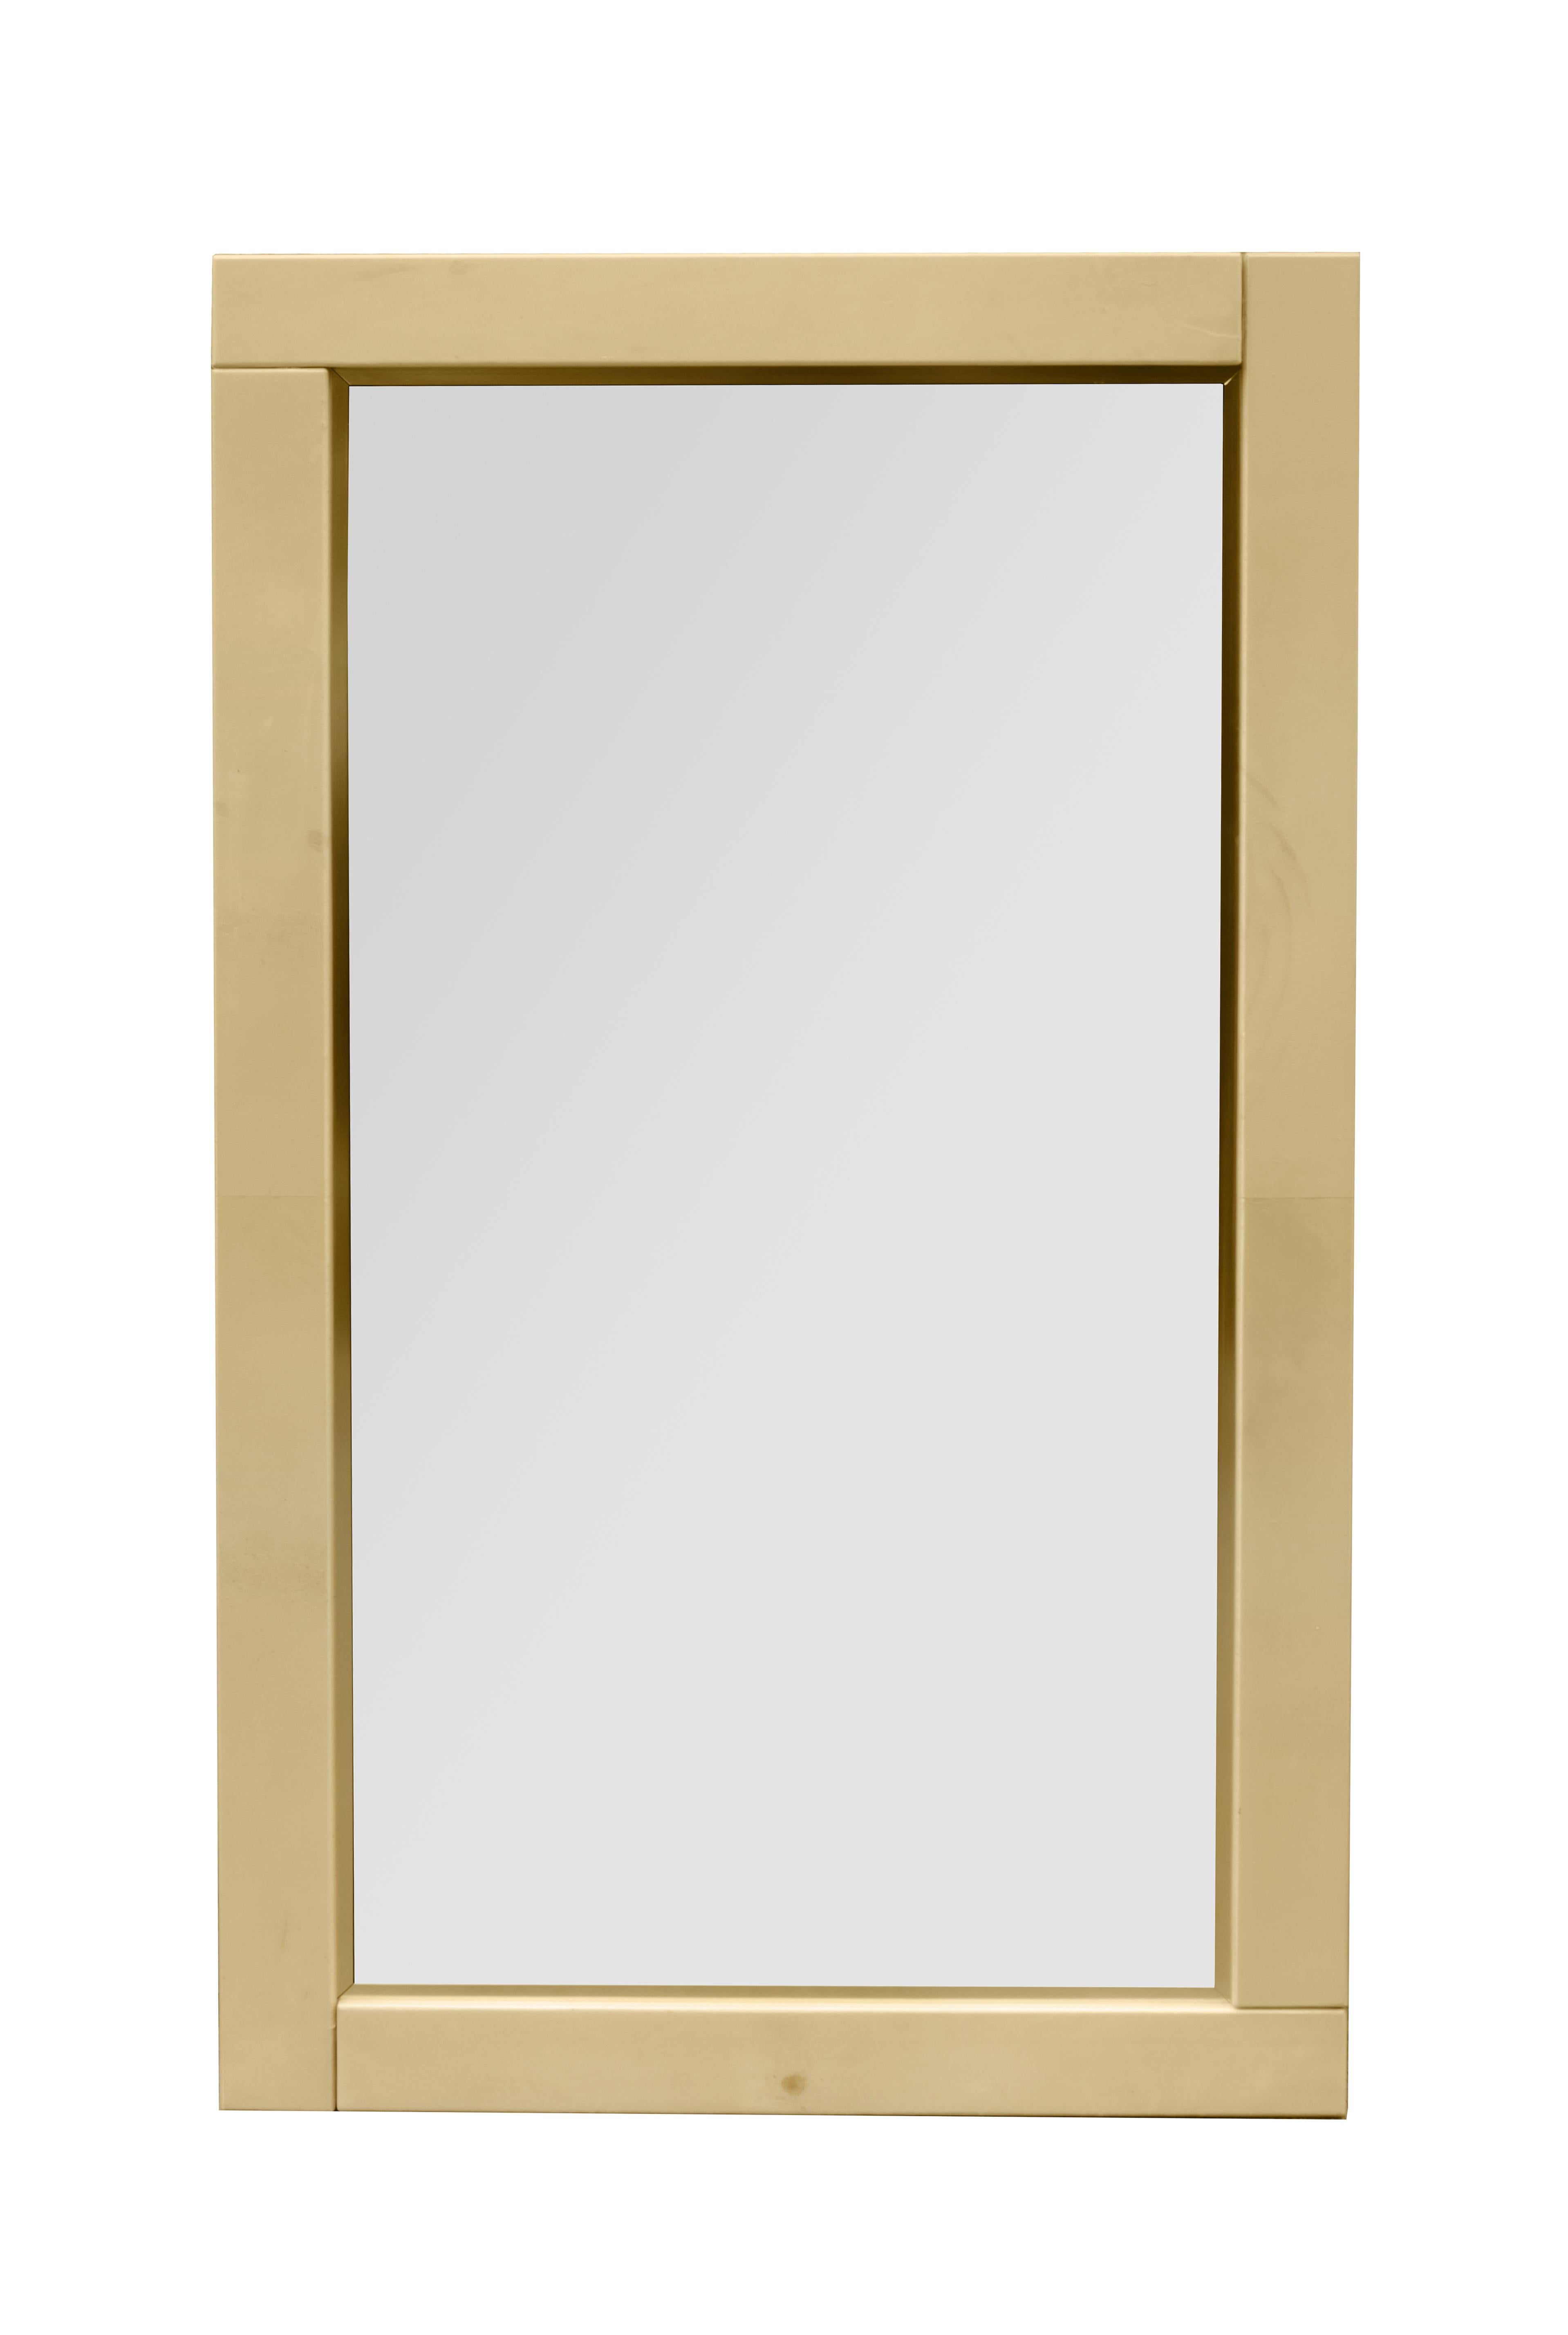 Pair of lacquered parchment modernist mirrors.
Lacquered goatskin with inner brass detail surrounding the mirror.